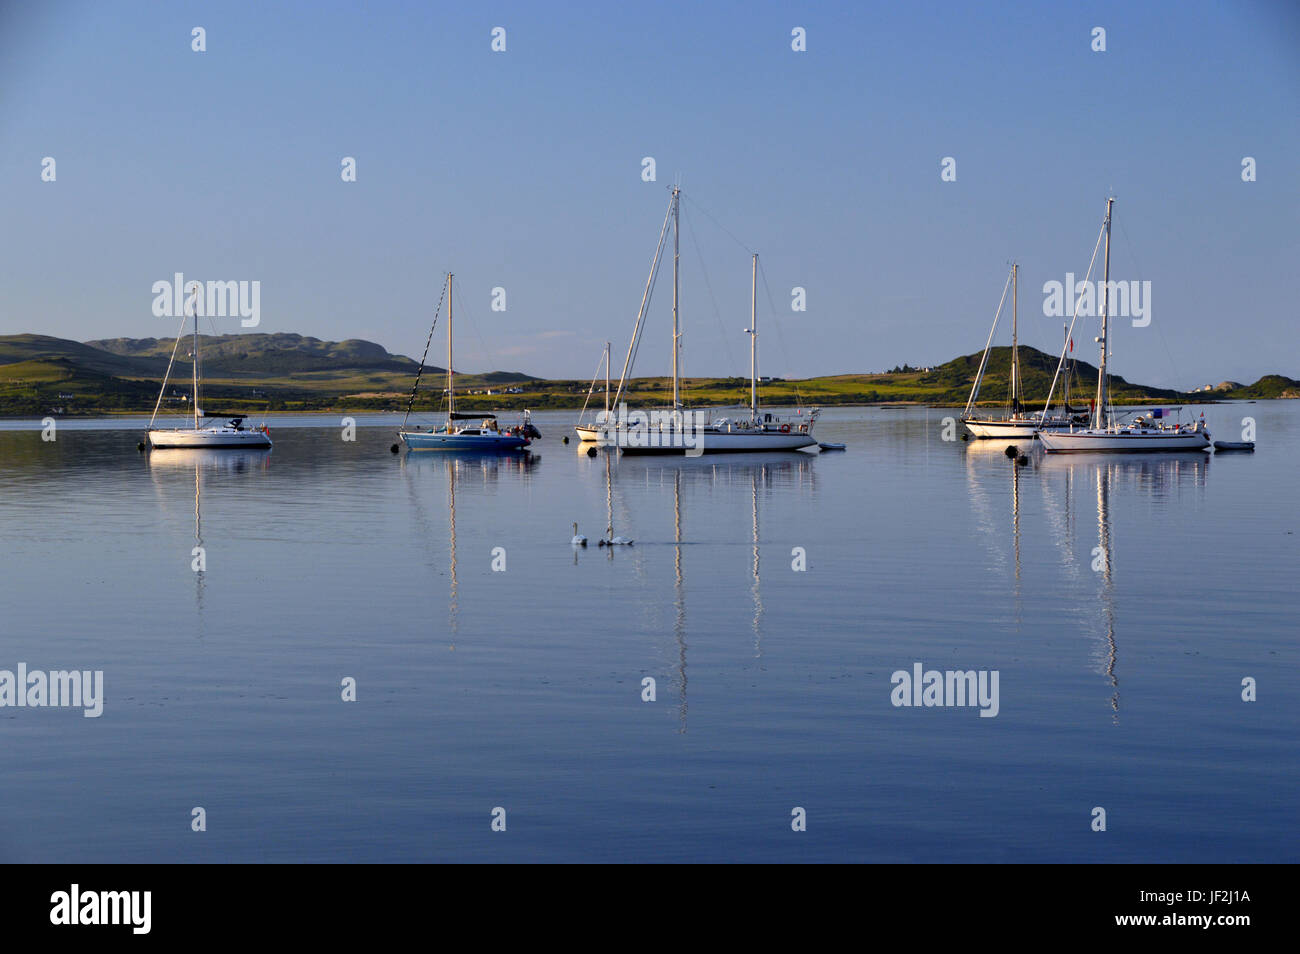 Five Sailing Boats Moored in Craighouse, Small Isles Bay  on the Isle of Jura in the Scottish Islands, Scotland UK. Stock Photo